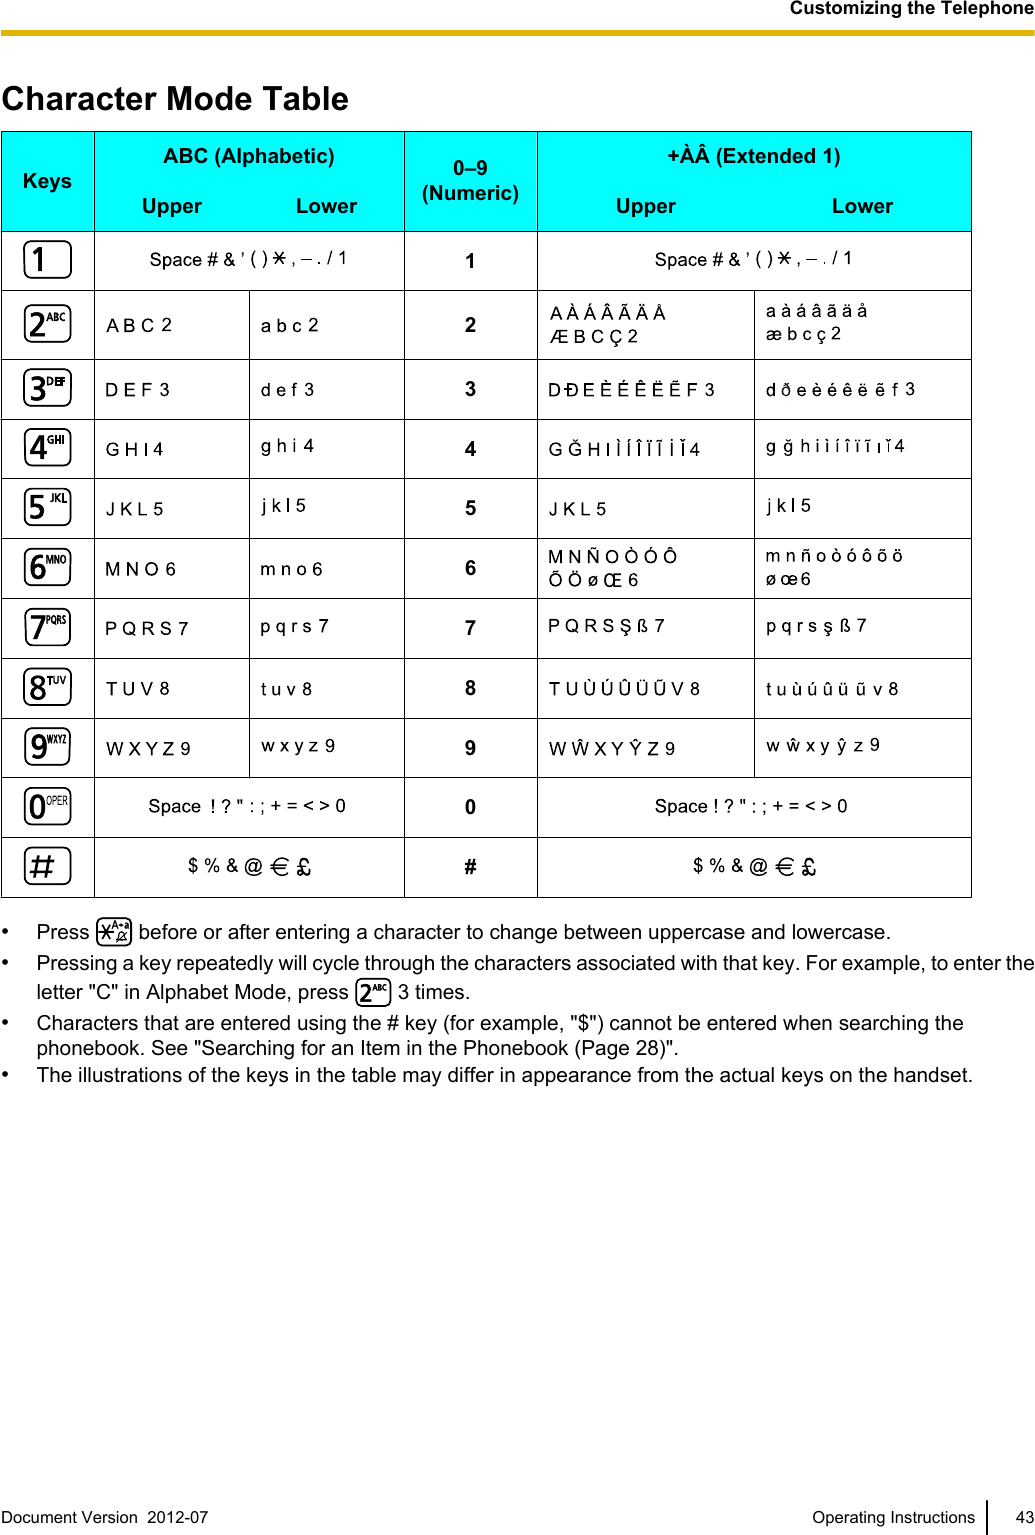 Character Mode TableKeysABC (Alphabetic) 0–9(Numeric)+ÀÂ (Extended 1)Upper Lower Upper Lower1234567890#•Press   before or after entering a character to change between uppercase and lowercase.•Pressing a key repeatedly will cycle through the characters associated with that key. For example, to enter theletter &quot;C&quot; in Alphabet Mode, press   3 times.•Characters that are entered using the # key (for example, &quot;$&quot;) cannot be entered when searching thephonebook. See &quot;Searching for an Item in the Phonebook (Page 28)&quot;.•The illustrations of the keys in the table may differ in appearance from the actual keys on the handset.Document Version  2012-07   Operating Instructions 43Customizing the Telephone